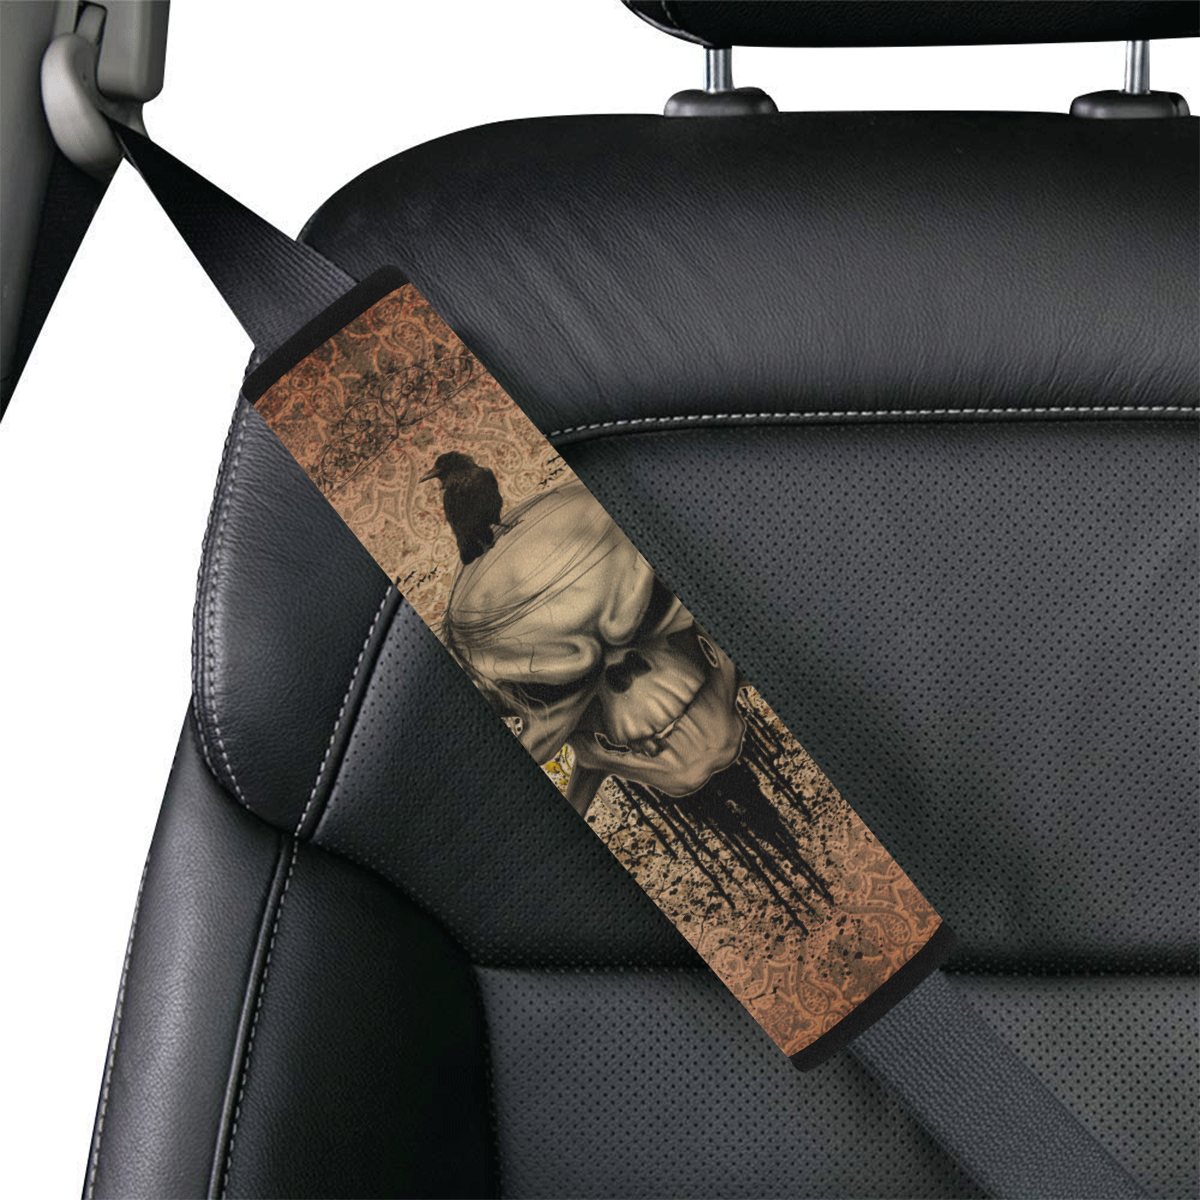 The scary skull with crow Car Seat Belt Cover 7''x12.6''